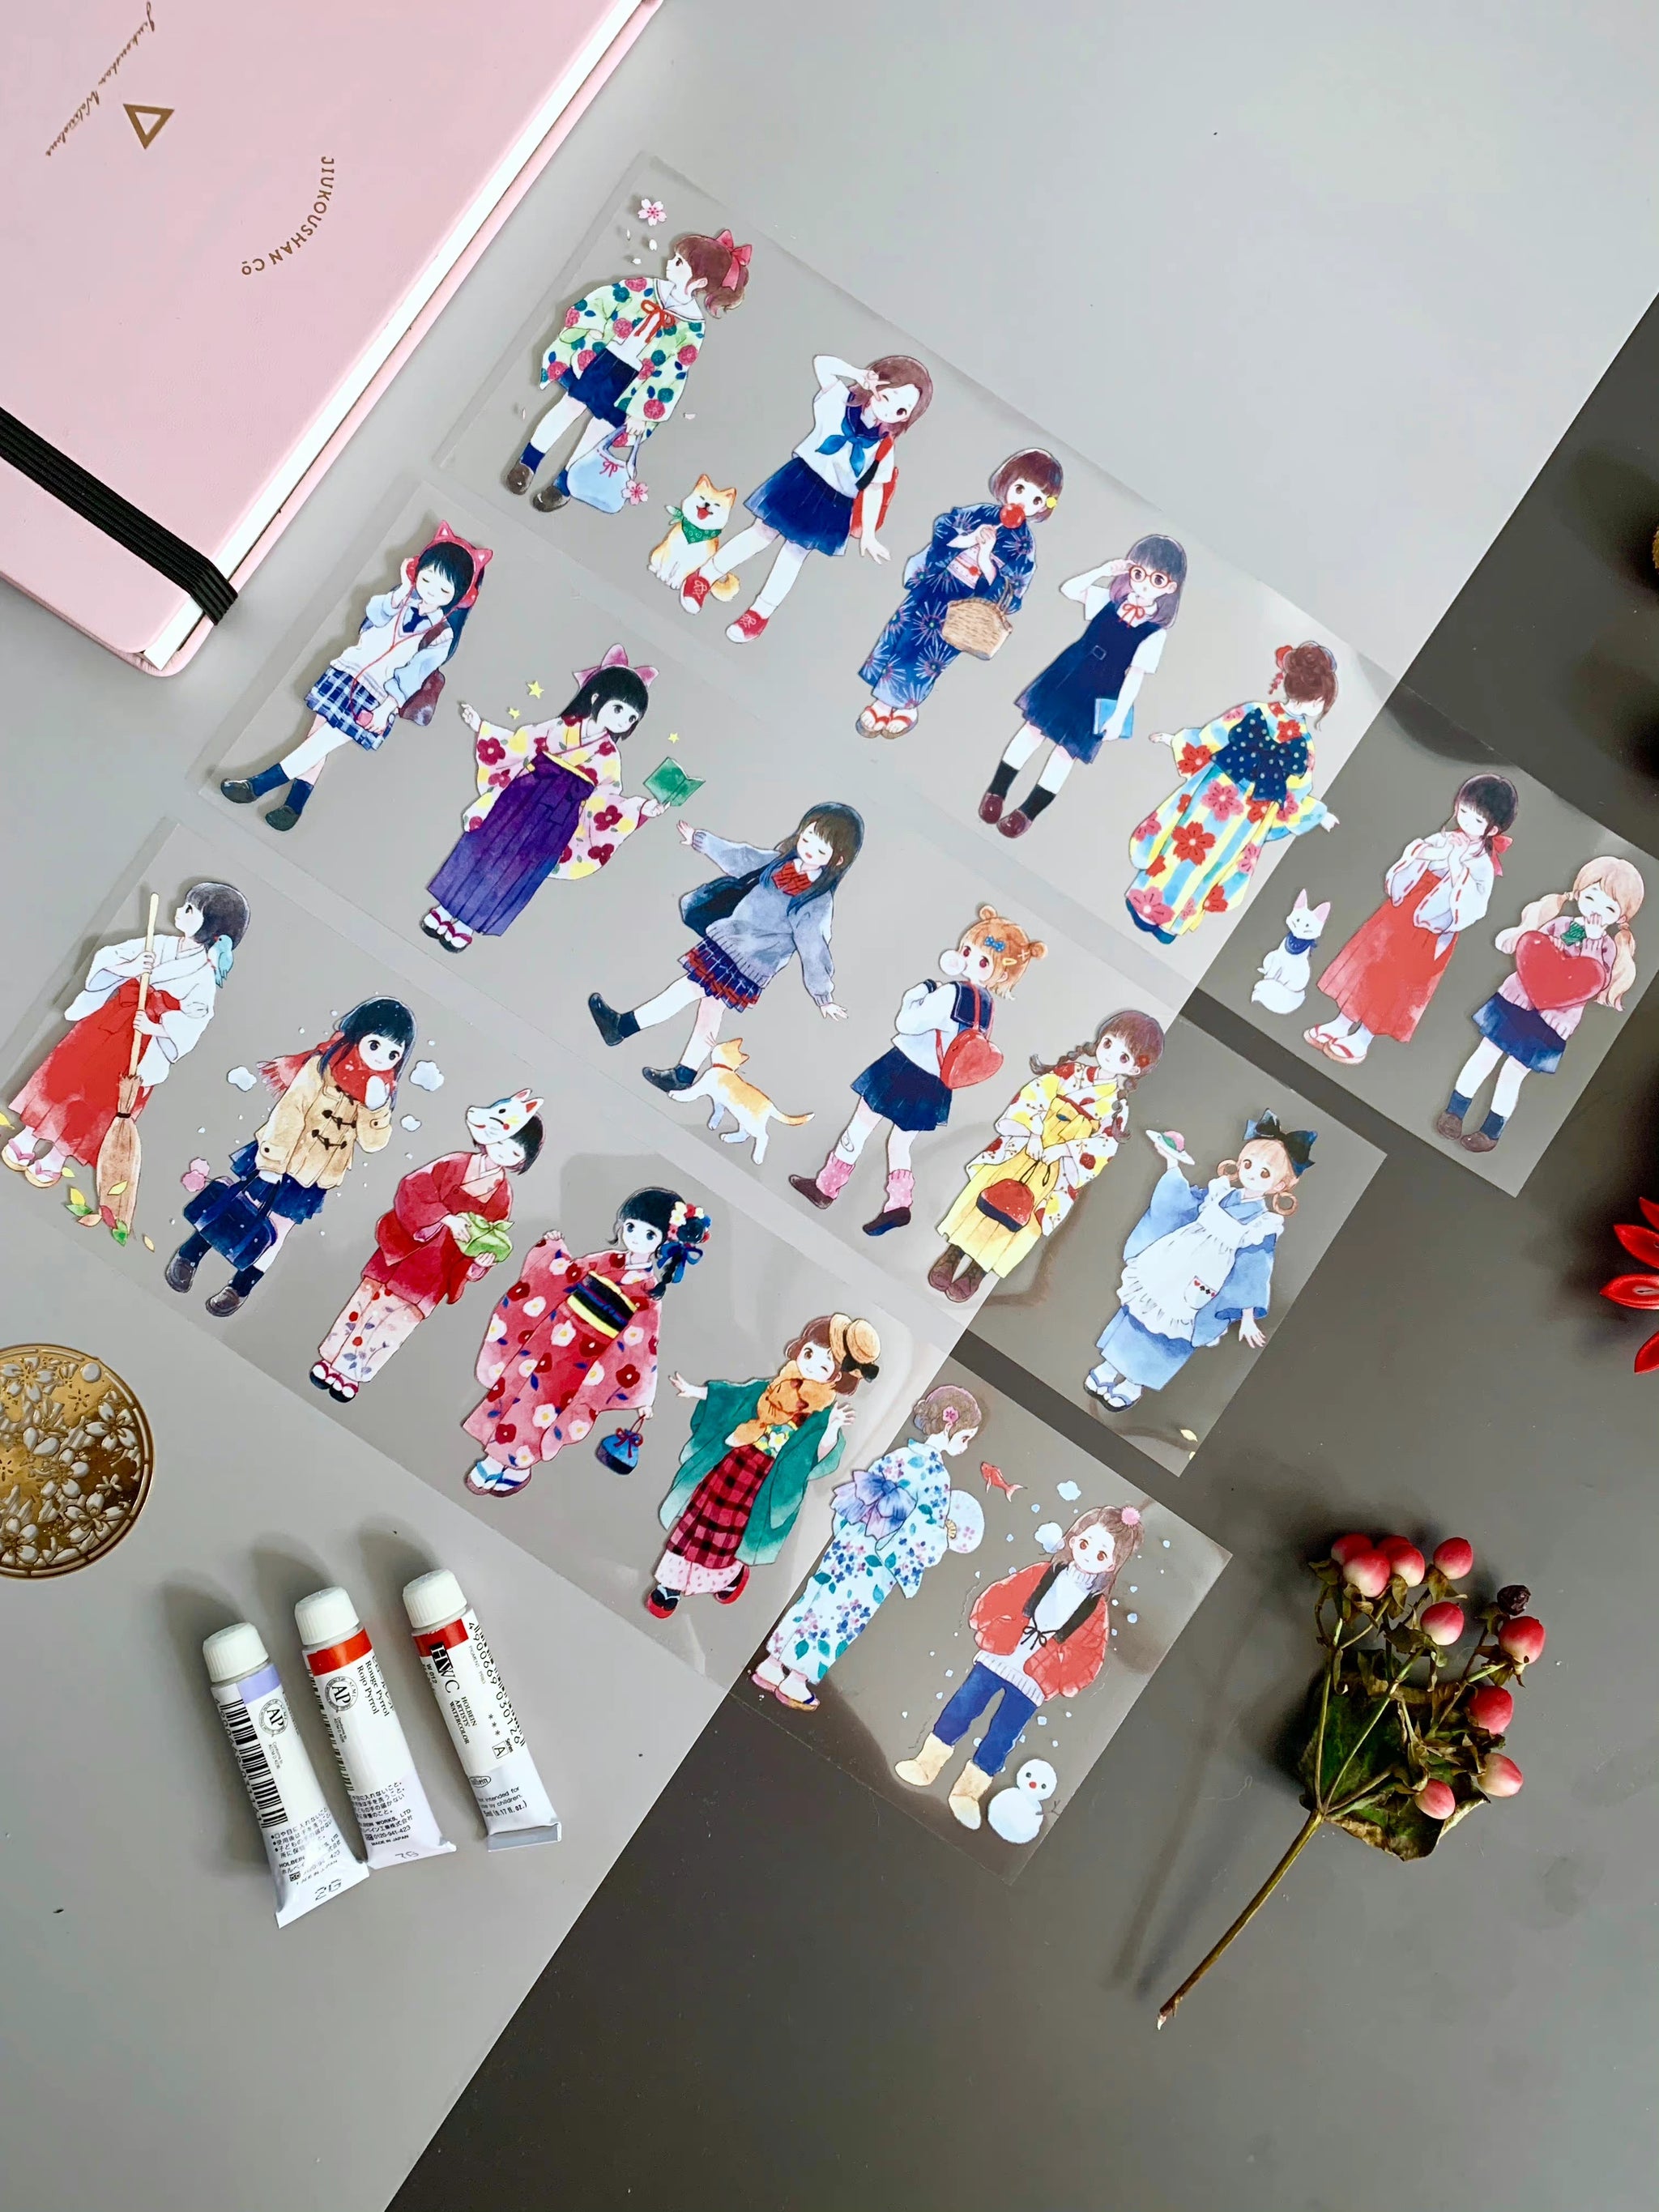 Tianxiaobao's Starry Sky: The Girls Masking Tape